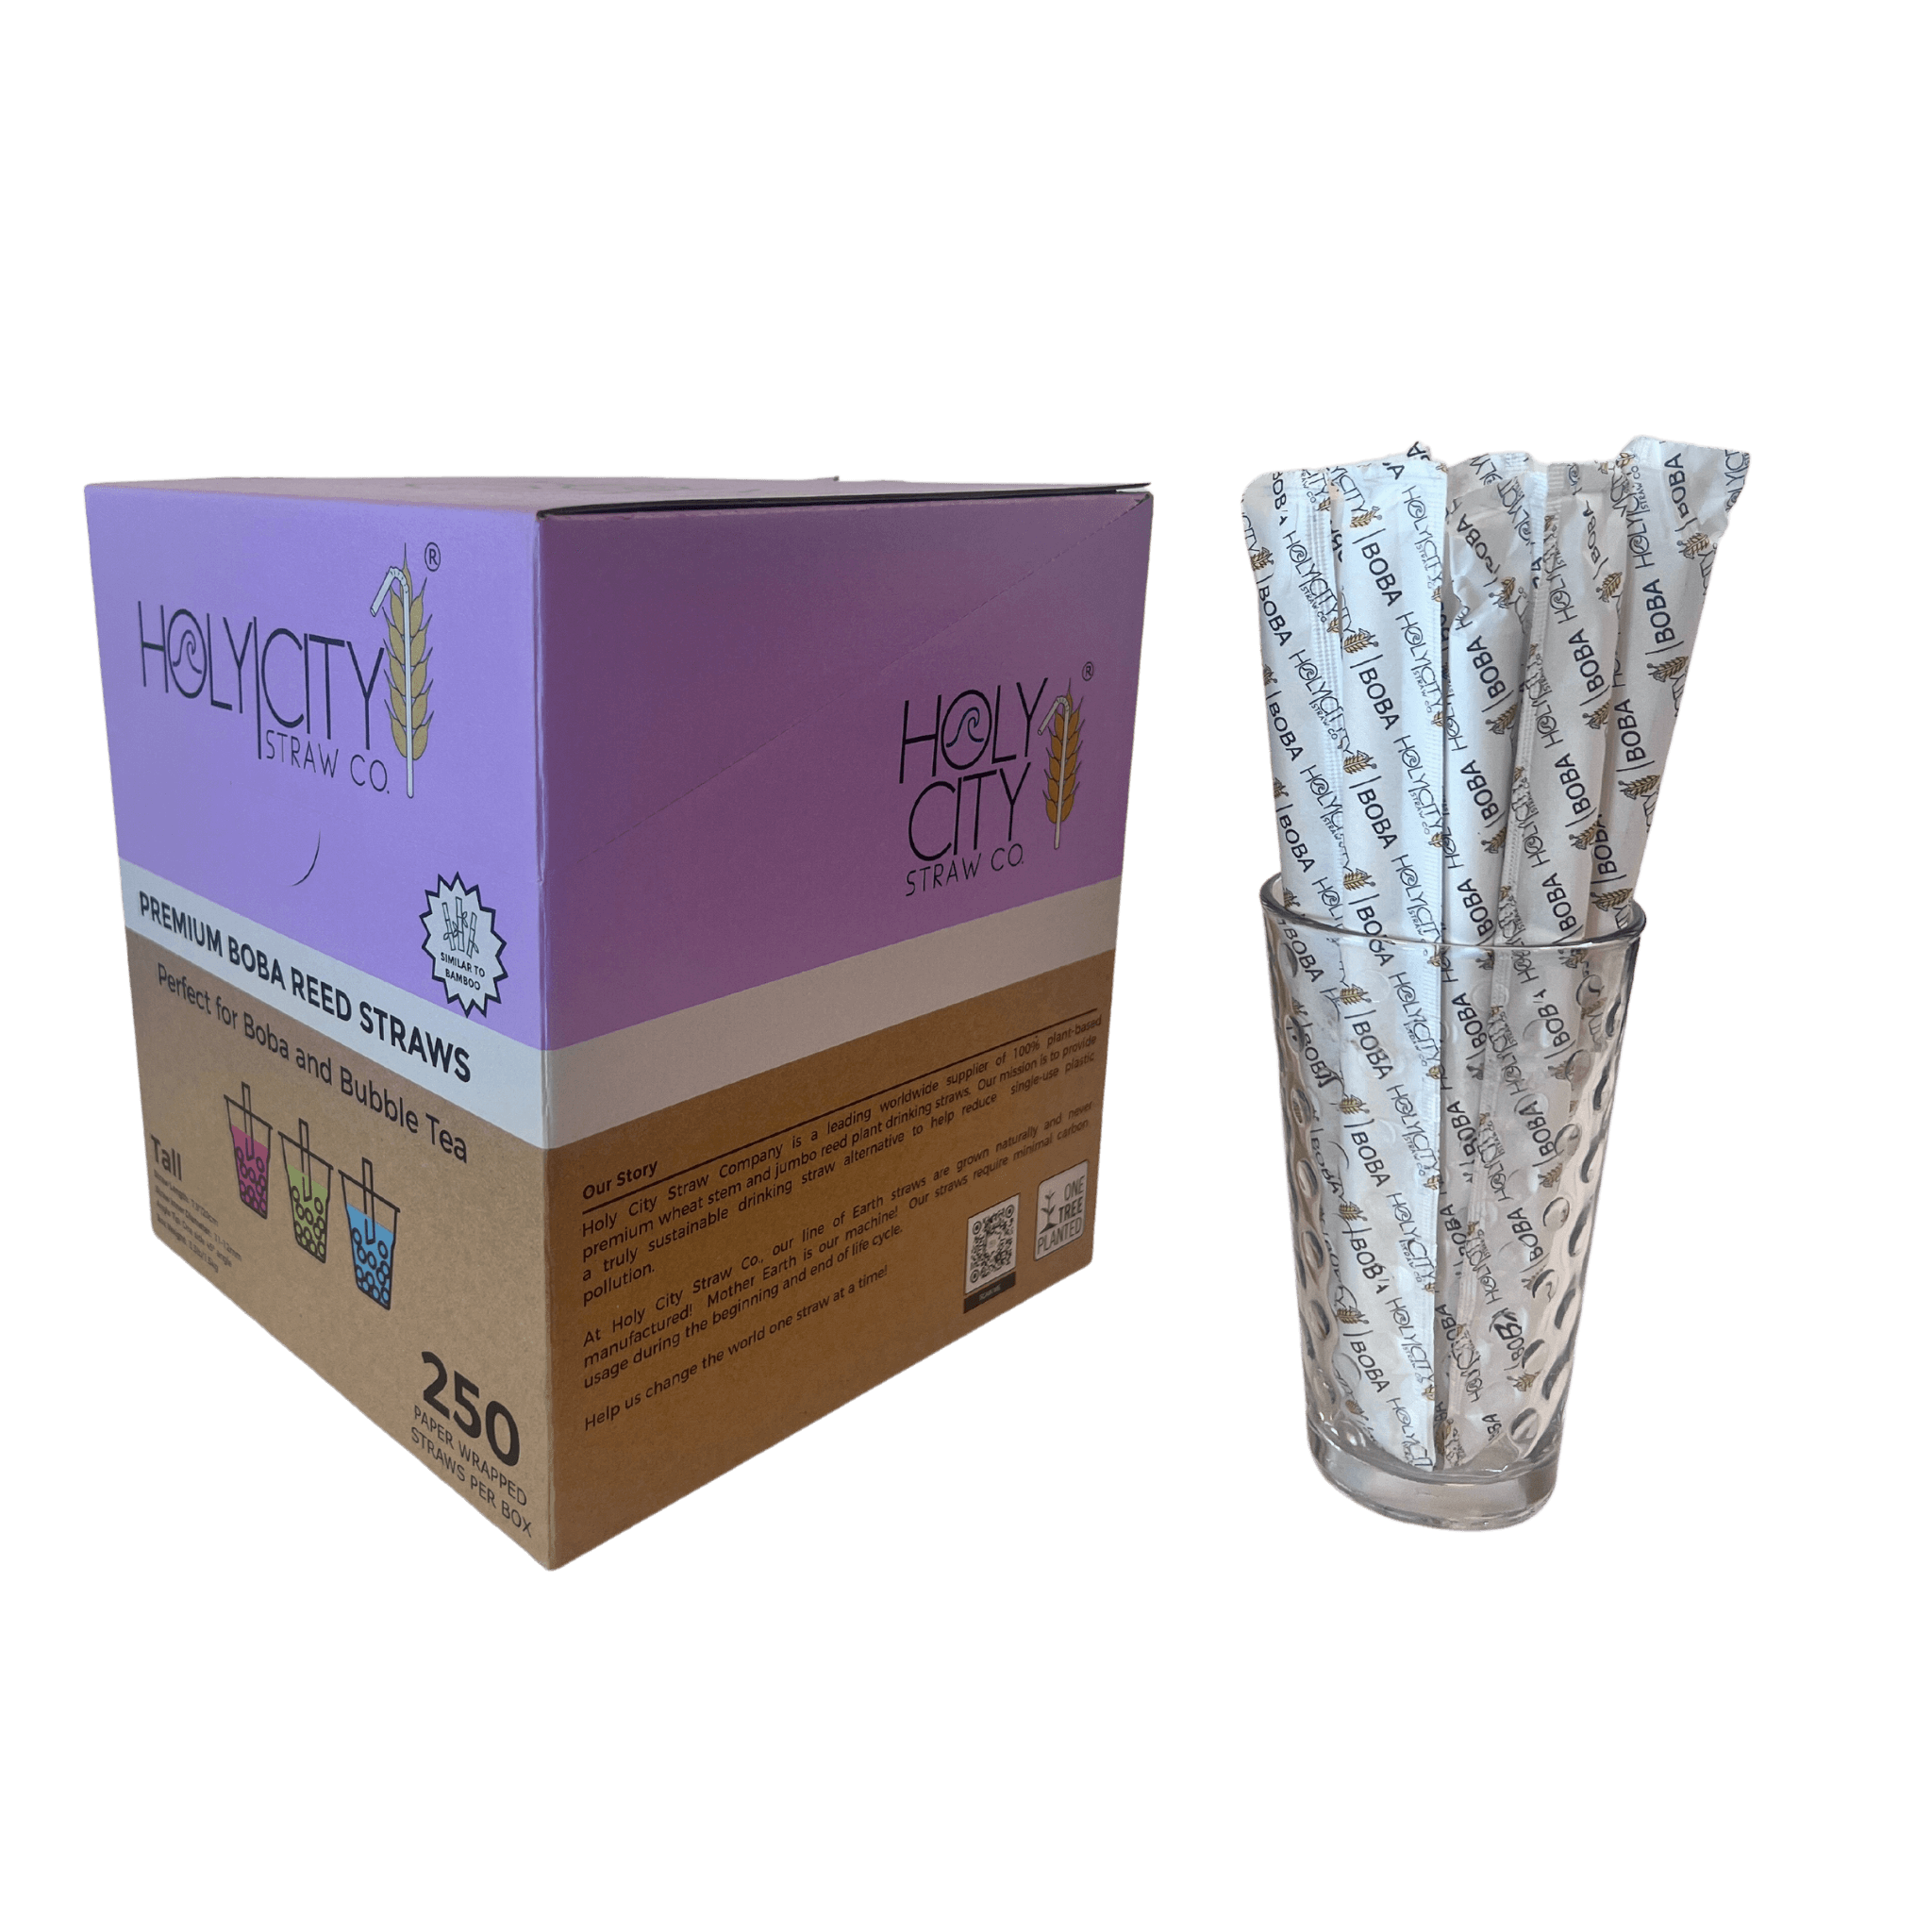 Holy City Straw Co wrapped boba reed straws angled box of 250 next to glass of straws transparent